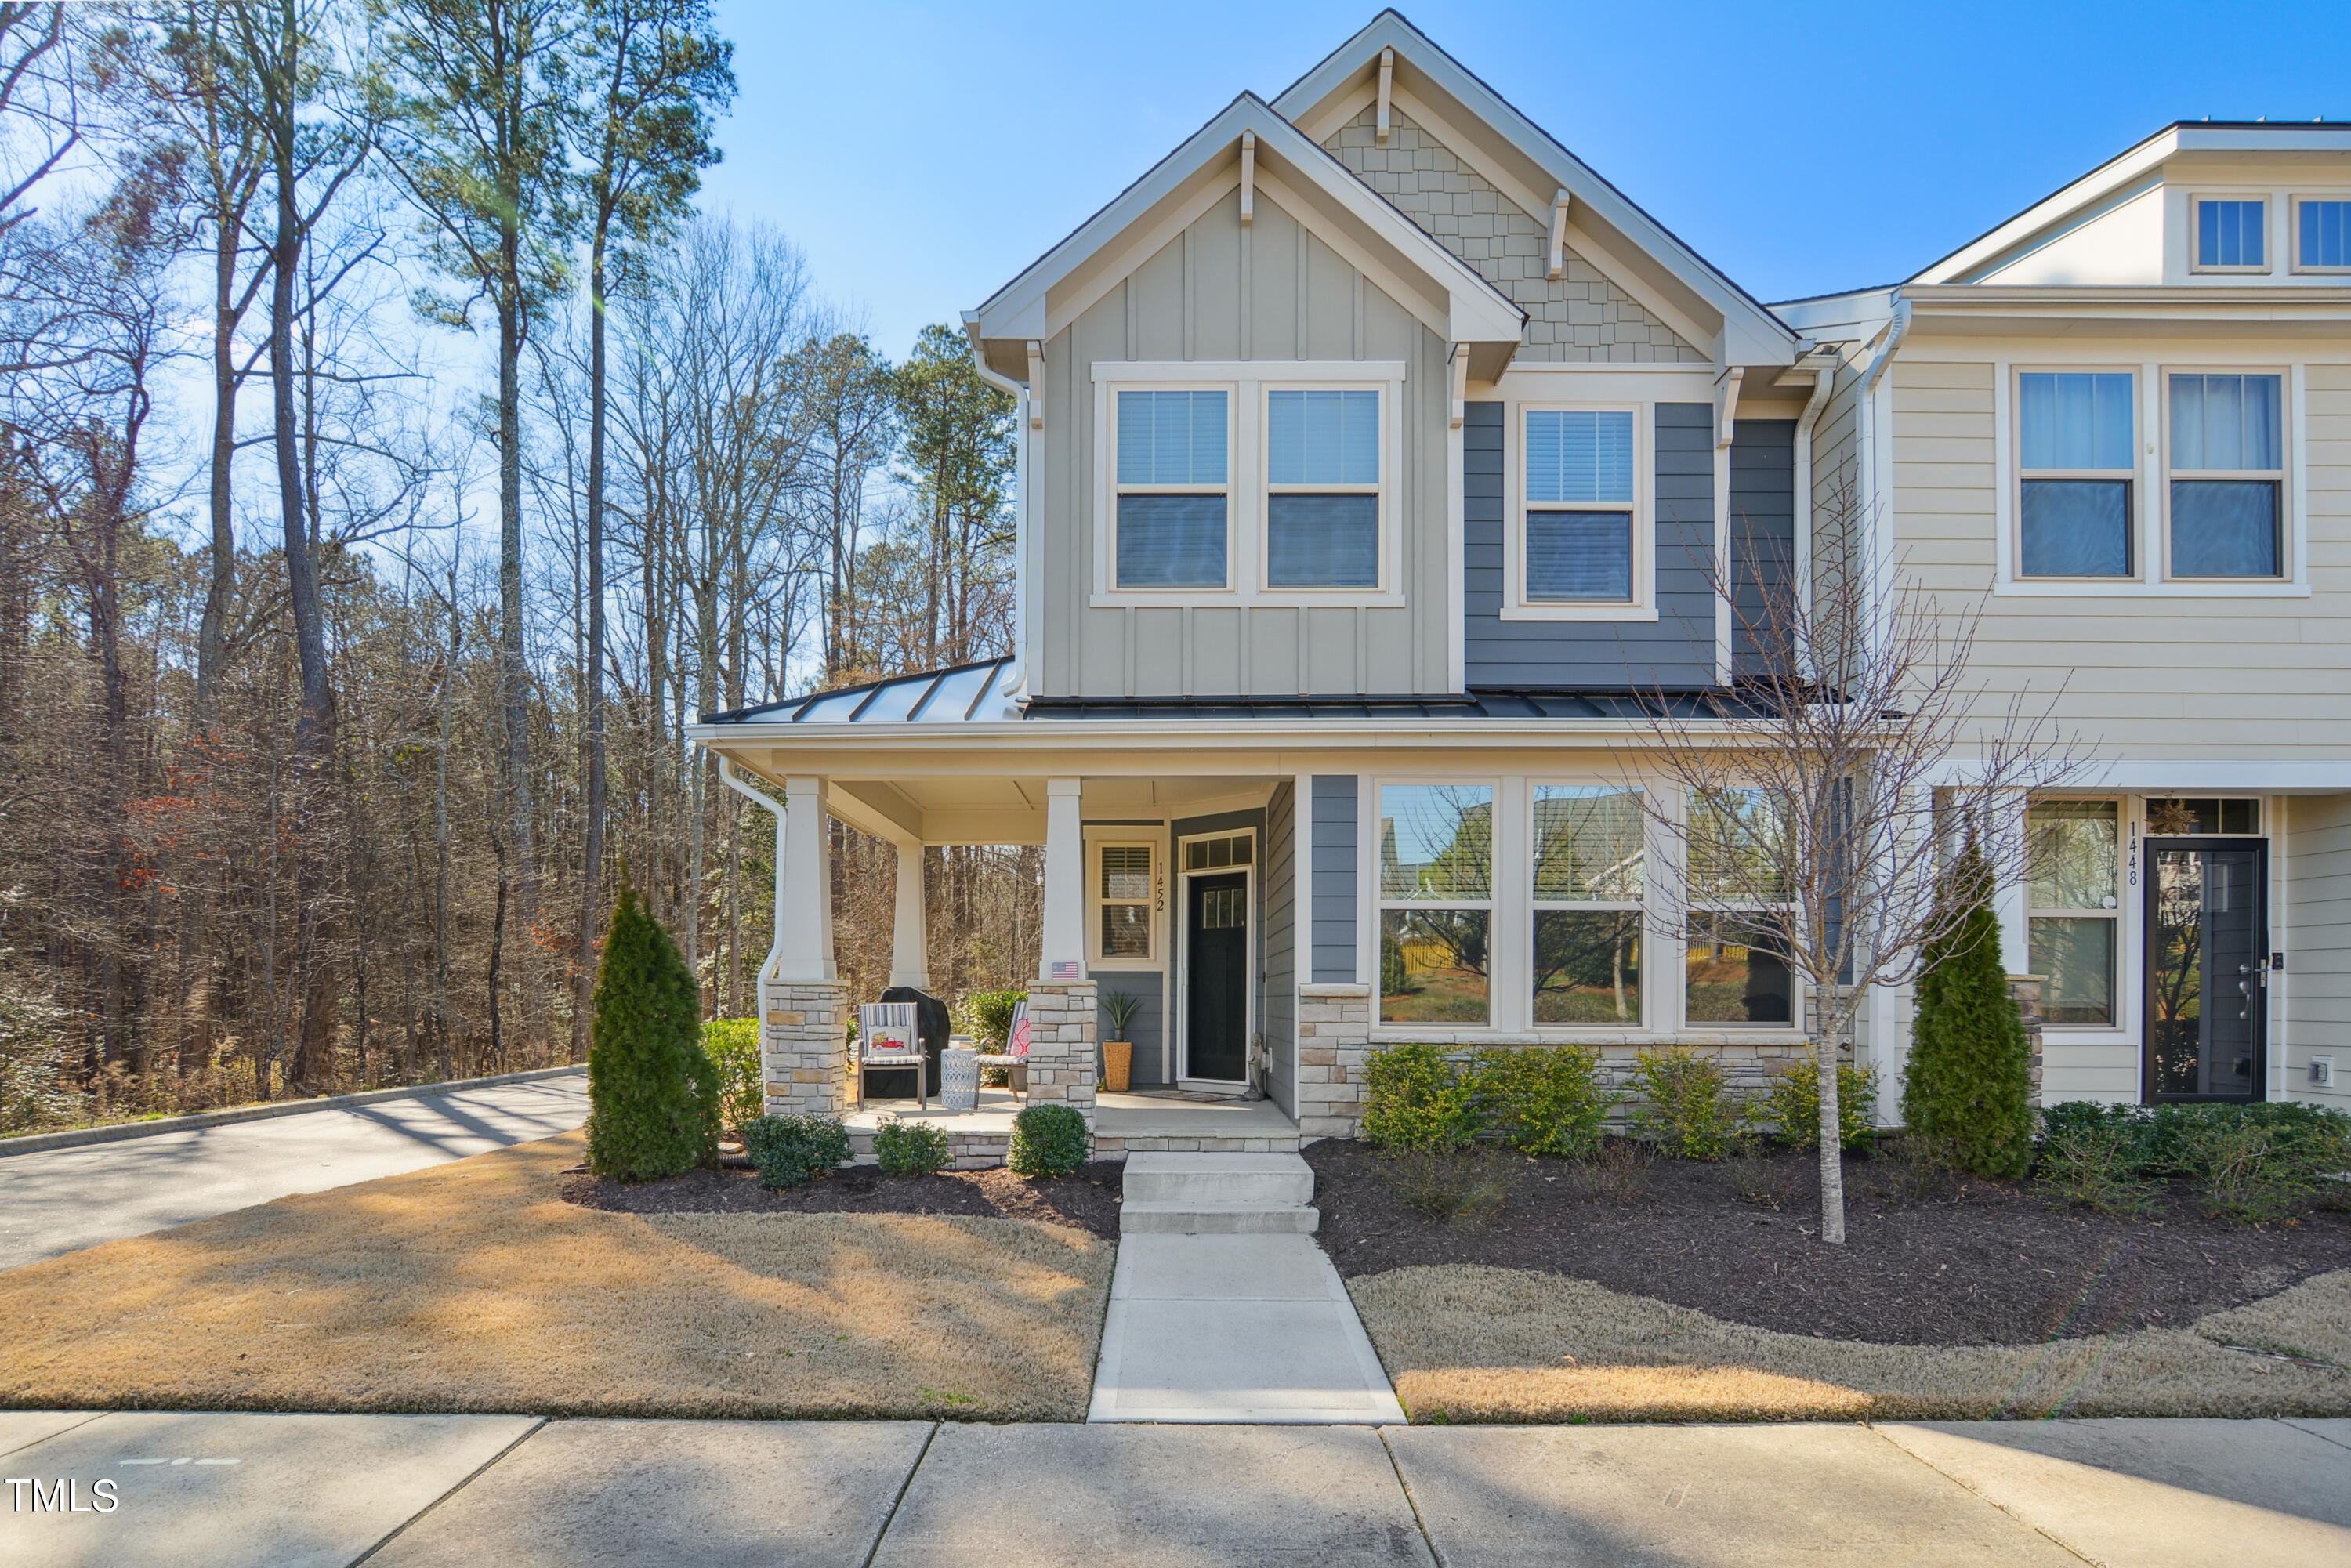 View Wendell, NC 27591 townhome